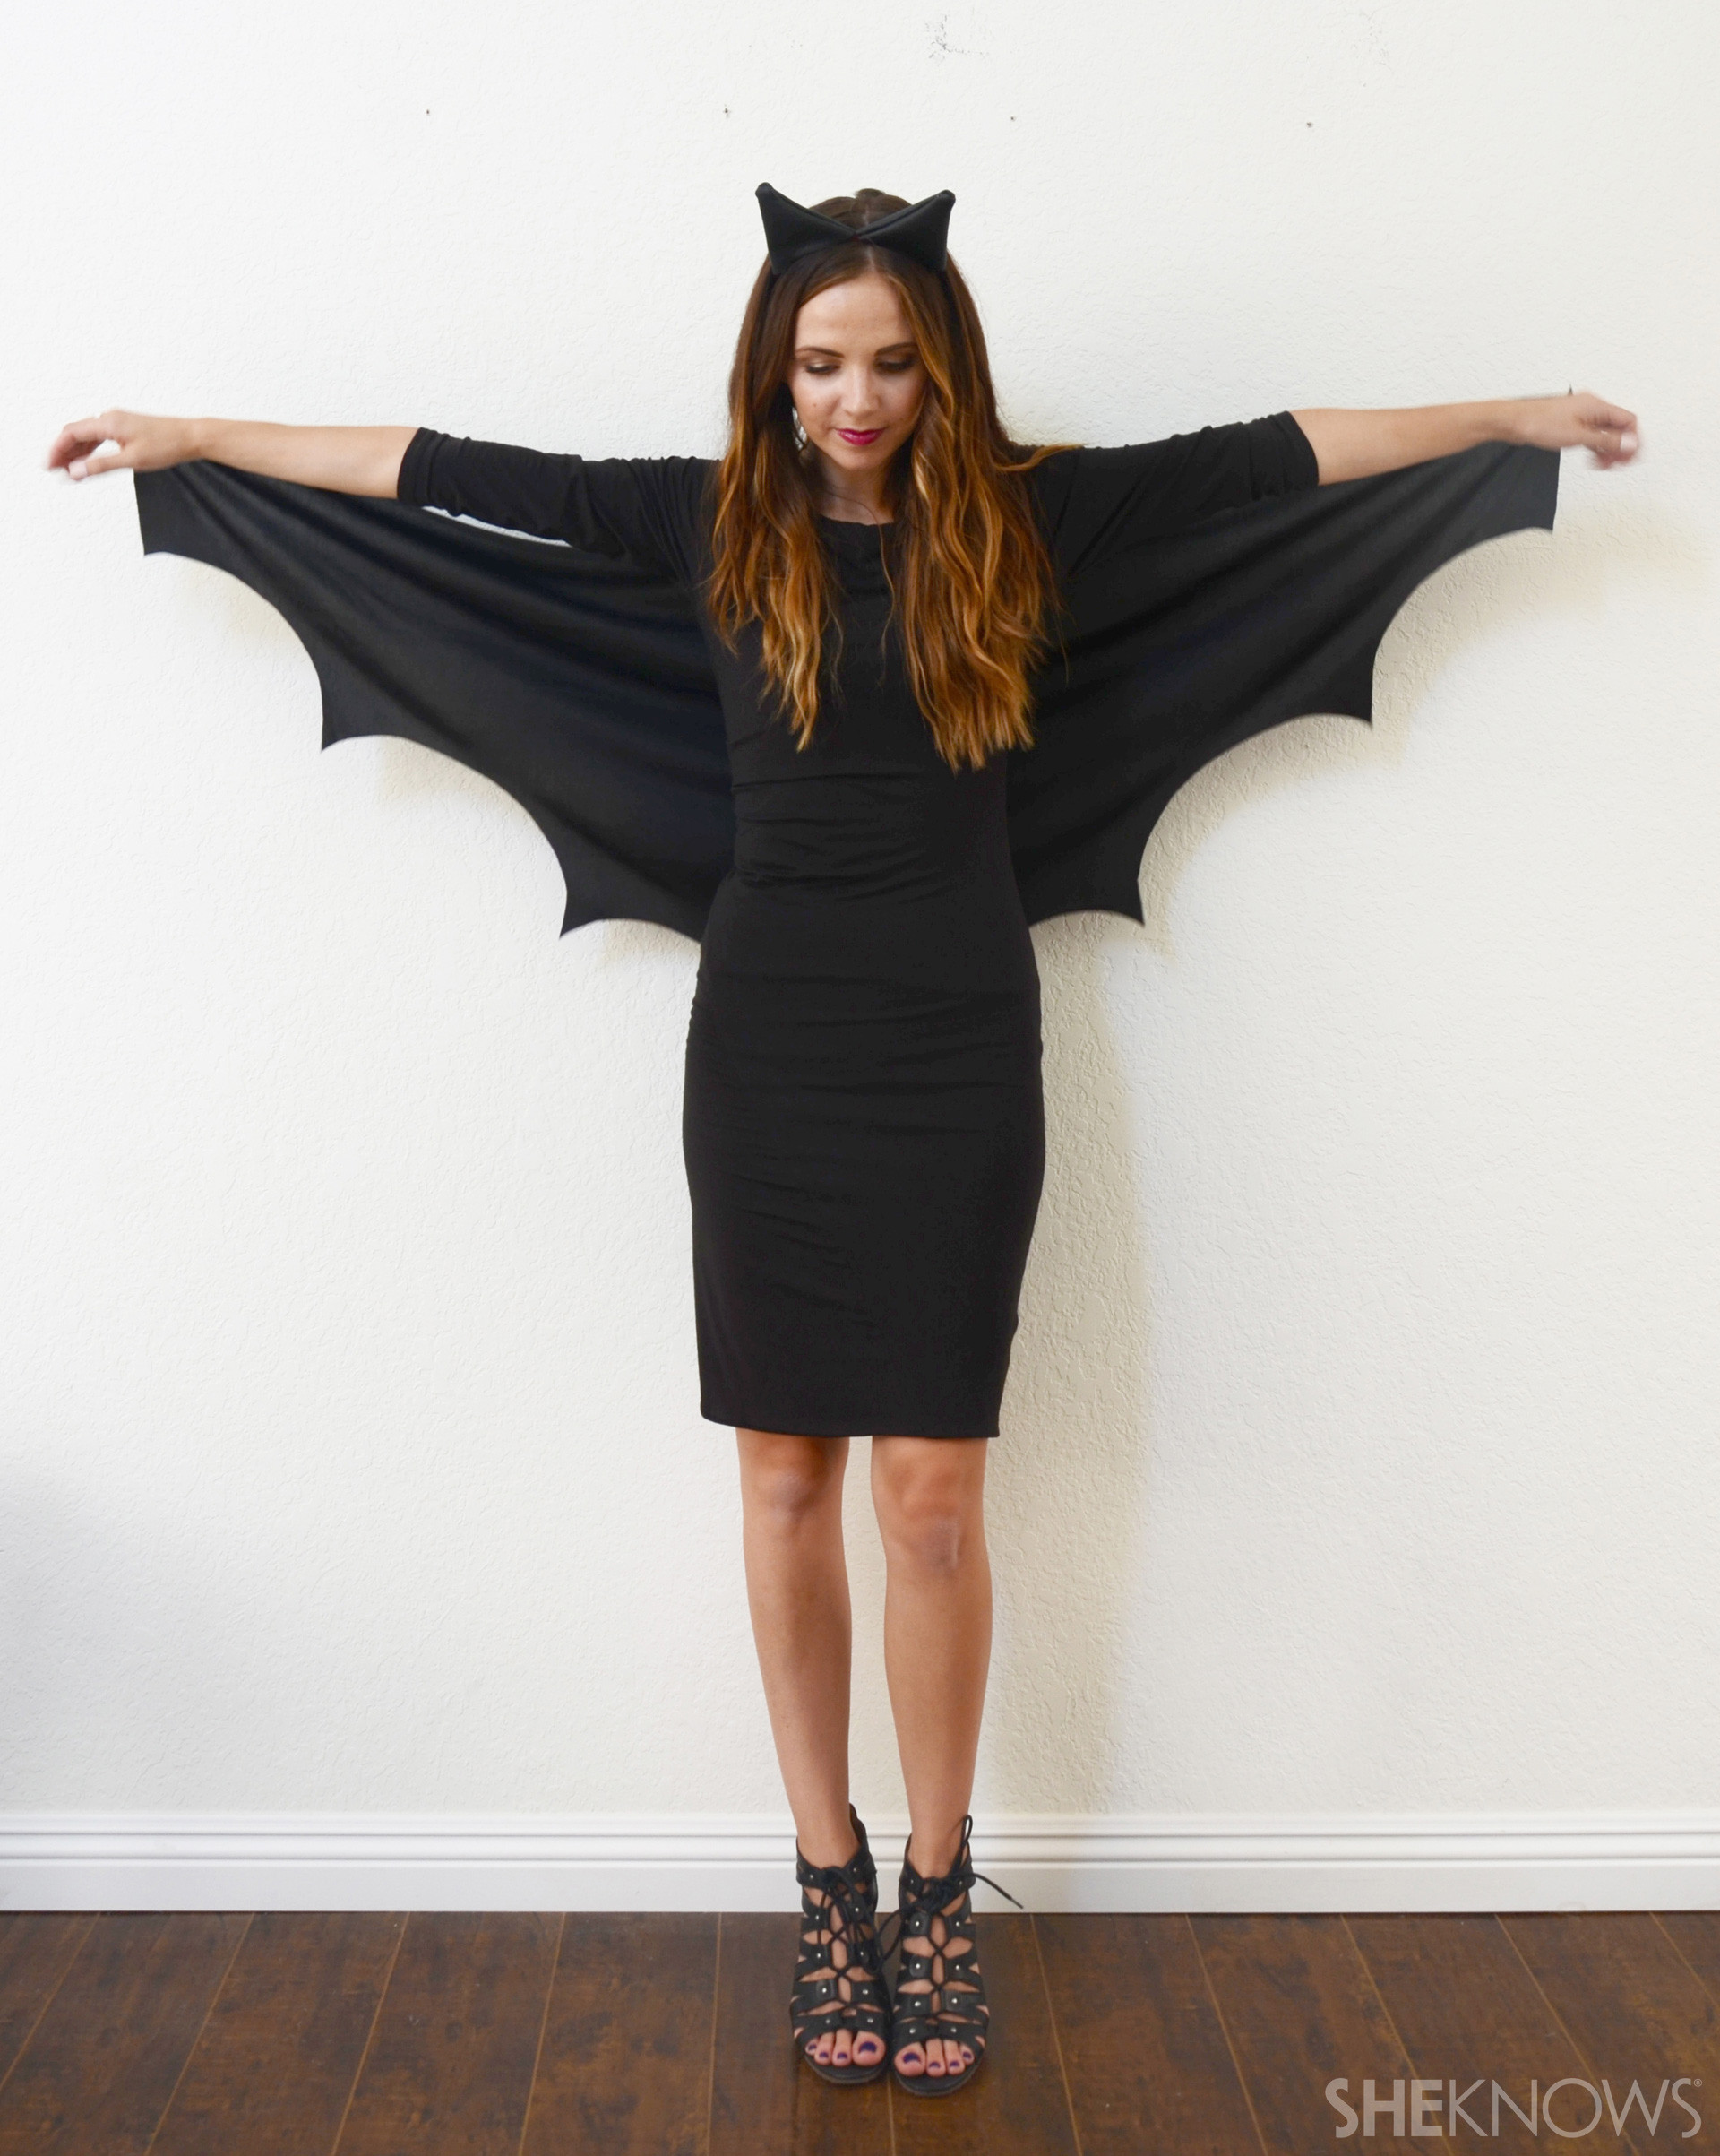 Halloween Costumes DIY
 A DIY Bat Costume so Easy No e Will Know It ly Took 10